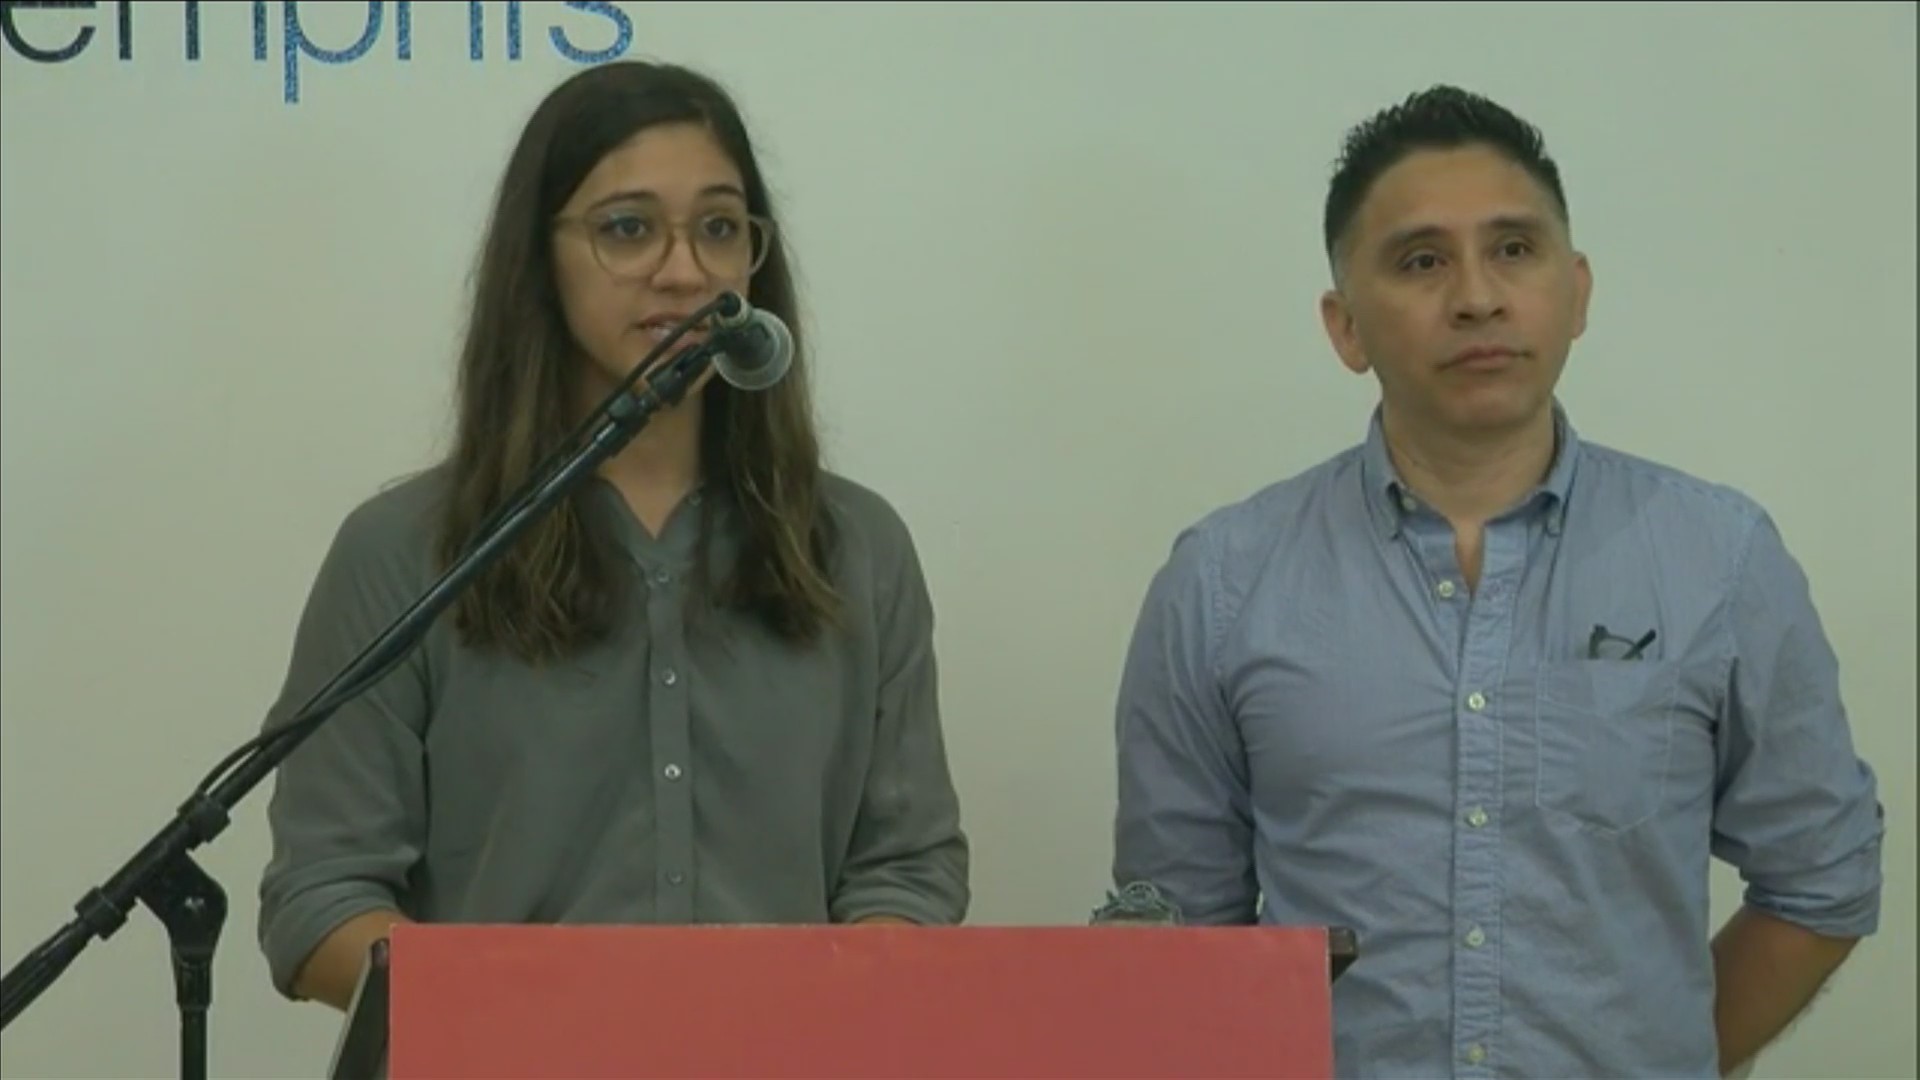 WEB EXTRA: News conference with journalist Manuel Duran, released from ICE custody last week - Part 1